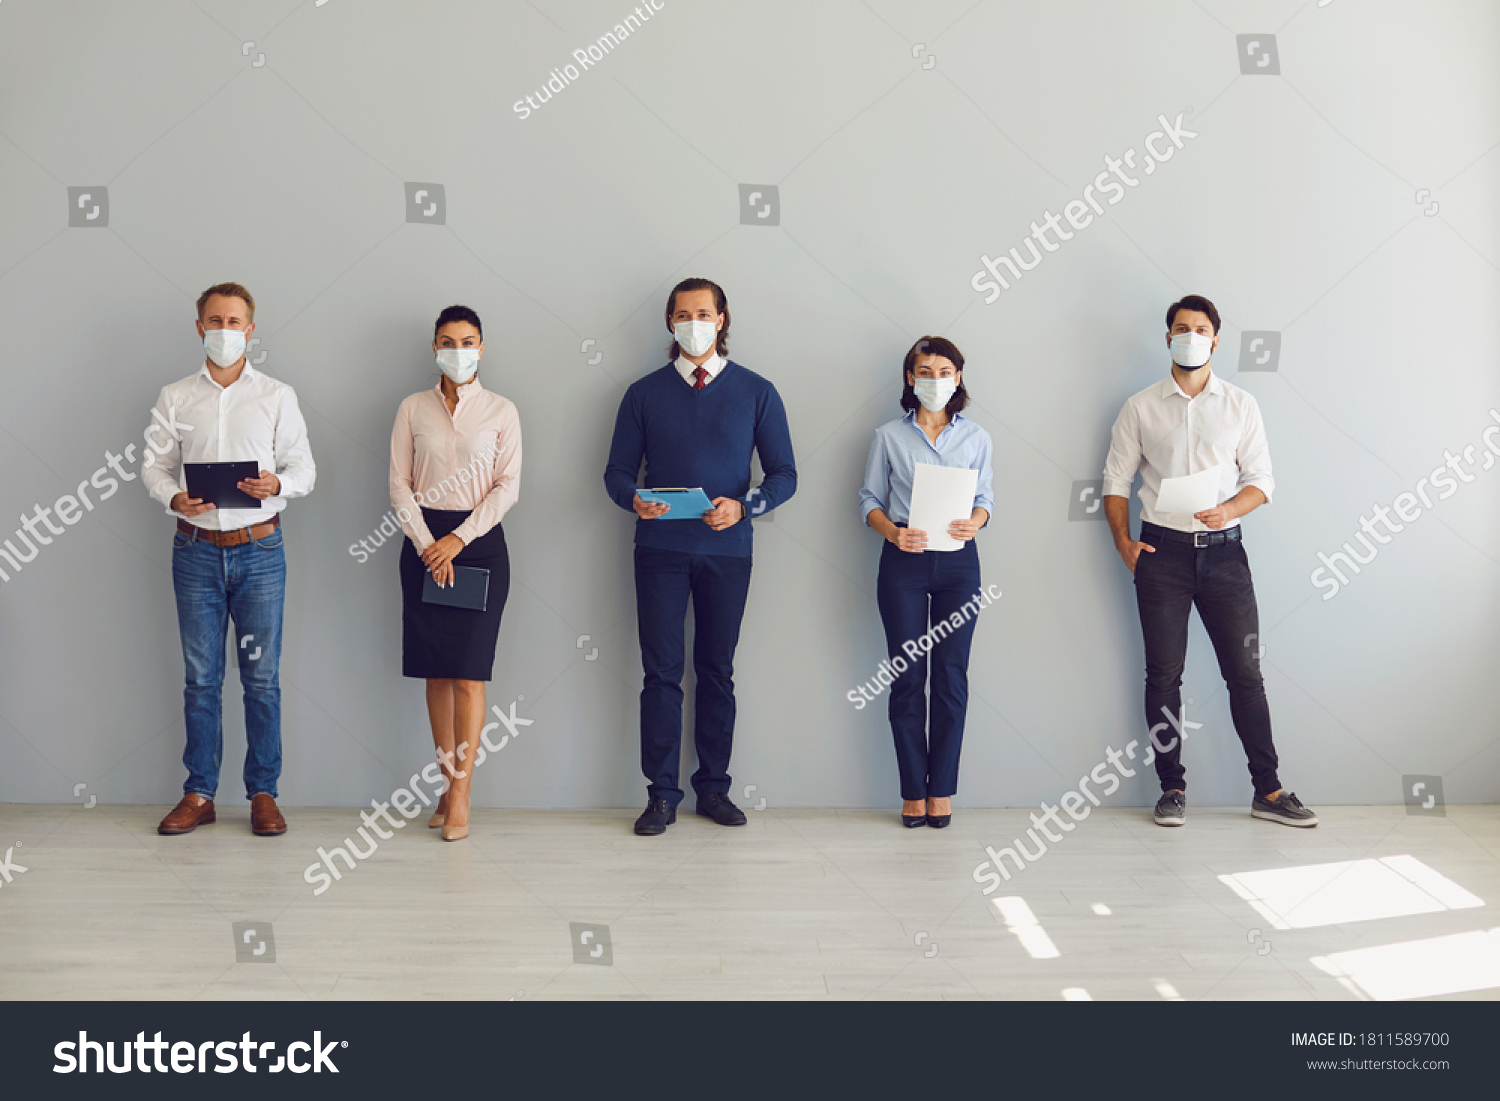 Social Distancing at Work concept. Office workers or job candidates in protective face masks standing in corridor. Applicants waiting for interview keeping safe distance to prevent spread of Covid 19 #1811589700